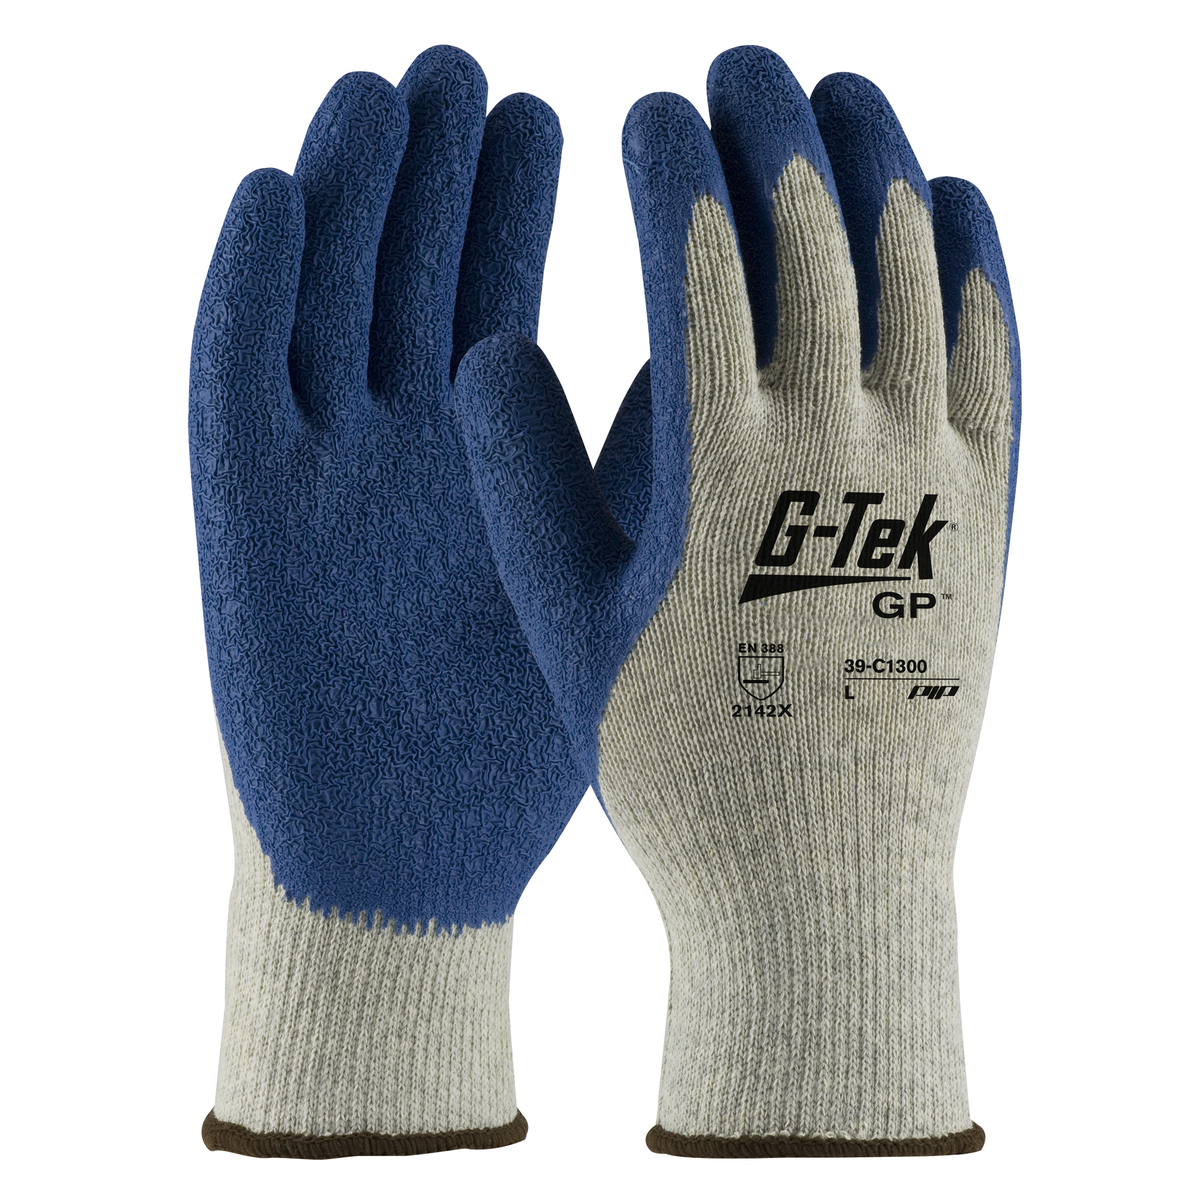 PIP® Large G-Tek® GP™ 10 Gauge Blue Nitrile Palm And Finger Coated Work Gloves With Cotton Liner And Continuous Knit Wrist